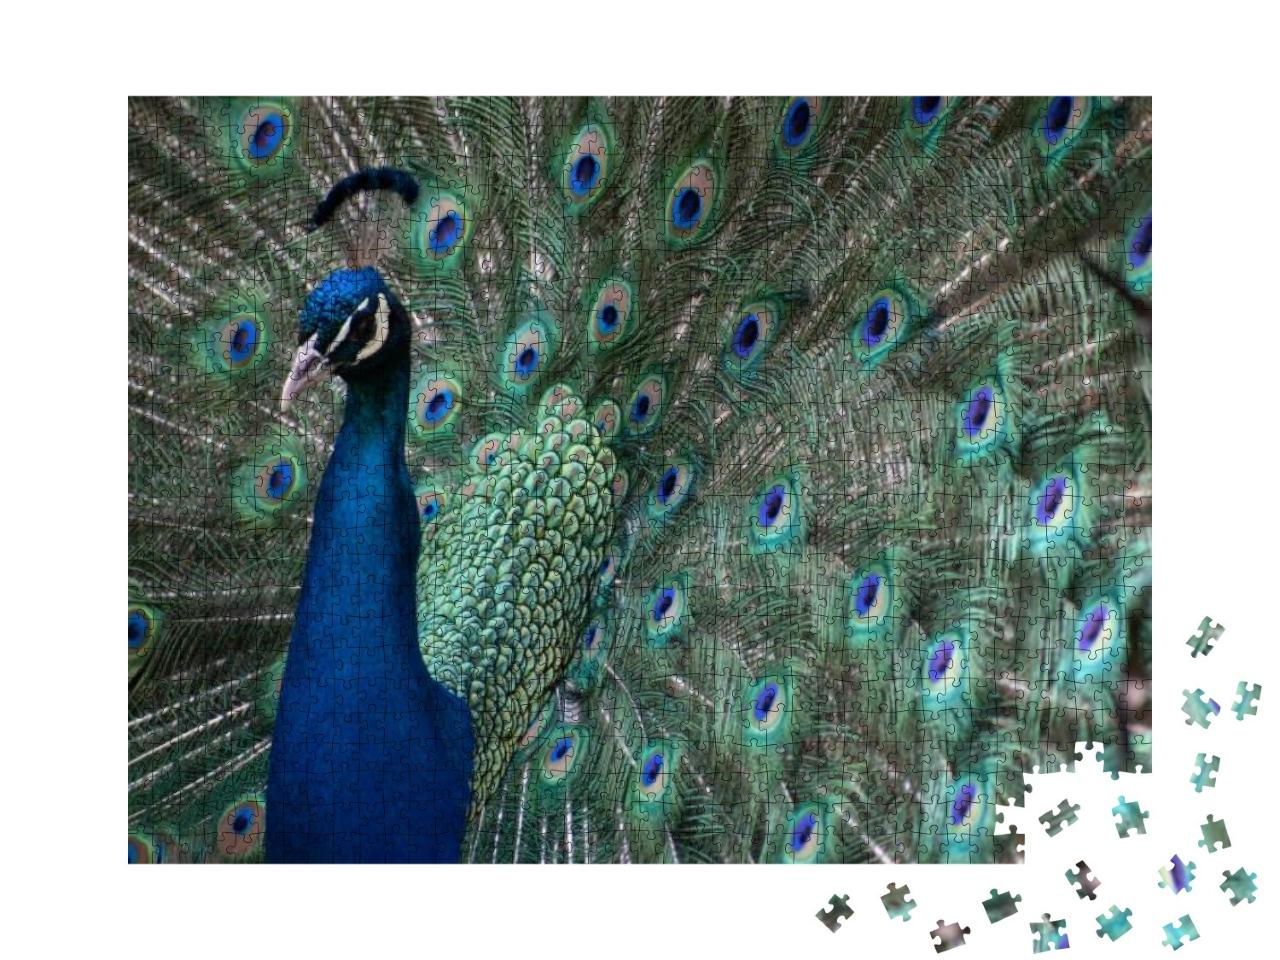 A Peacock with Feathers Out... Jigsaw Puzzle with 1000 pieces